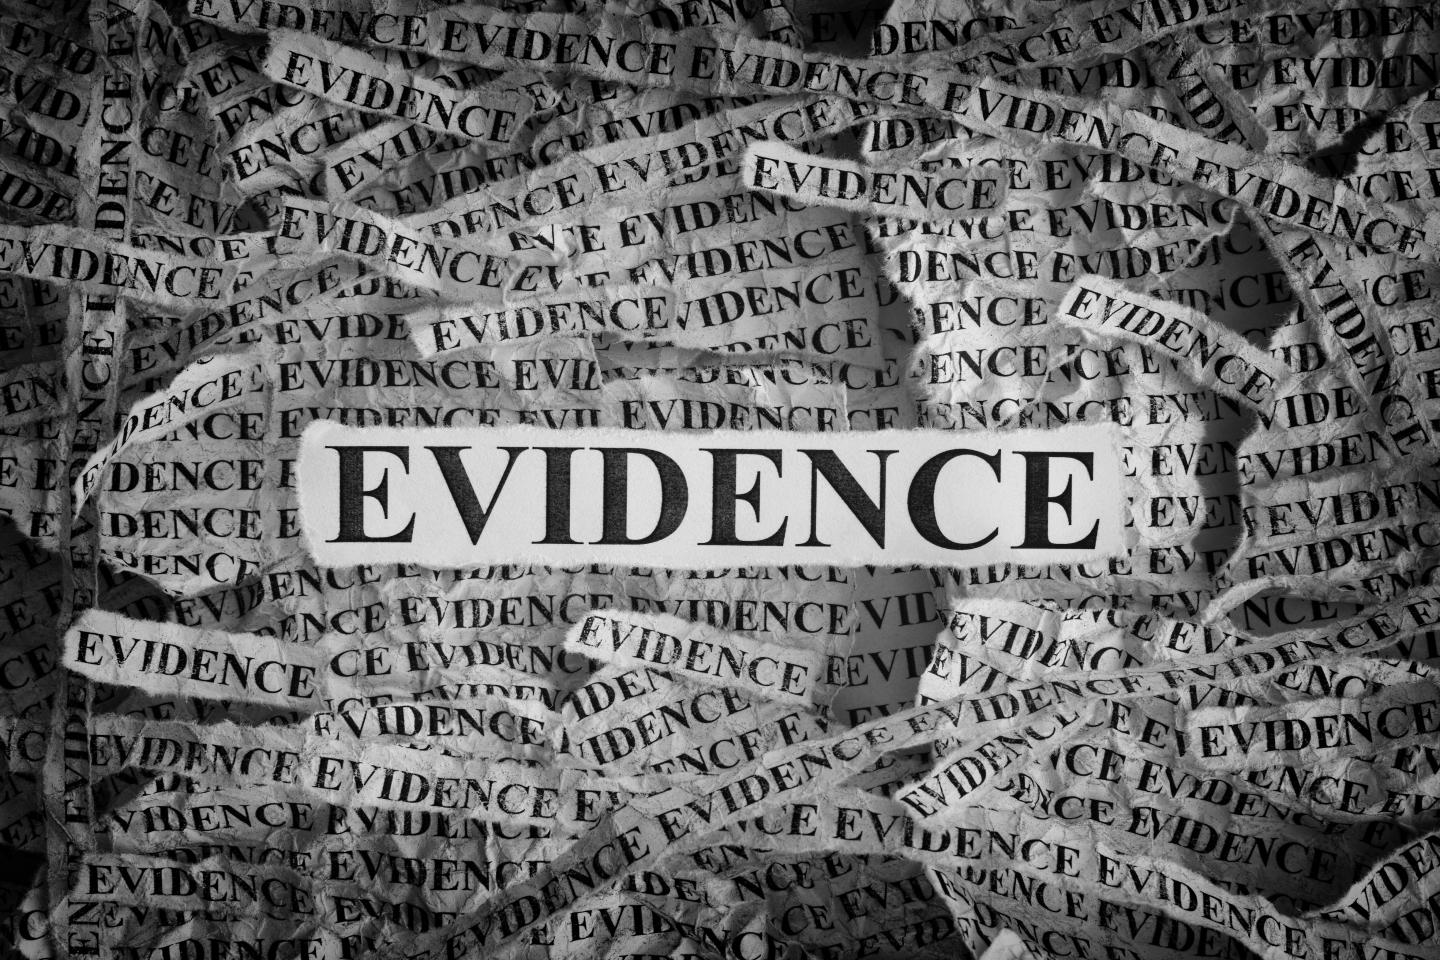 Evidence to inform Policymaking